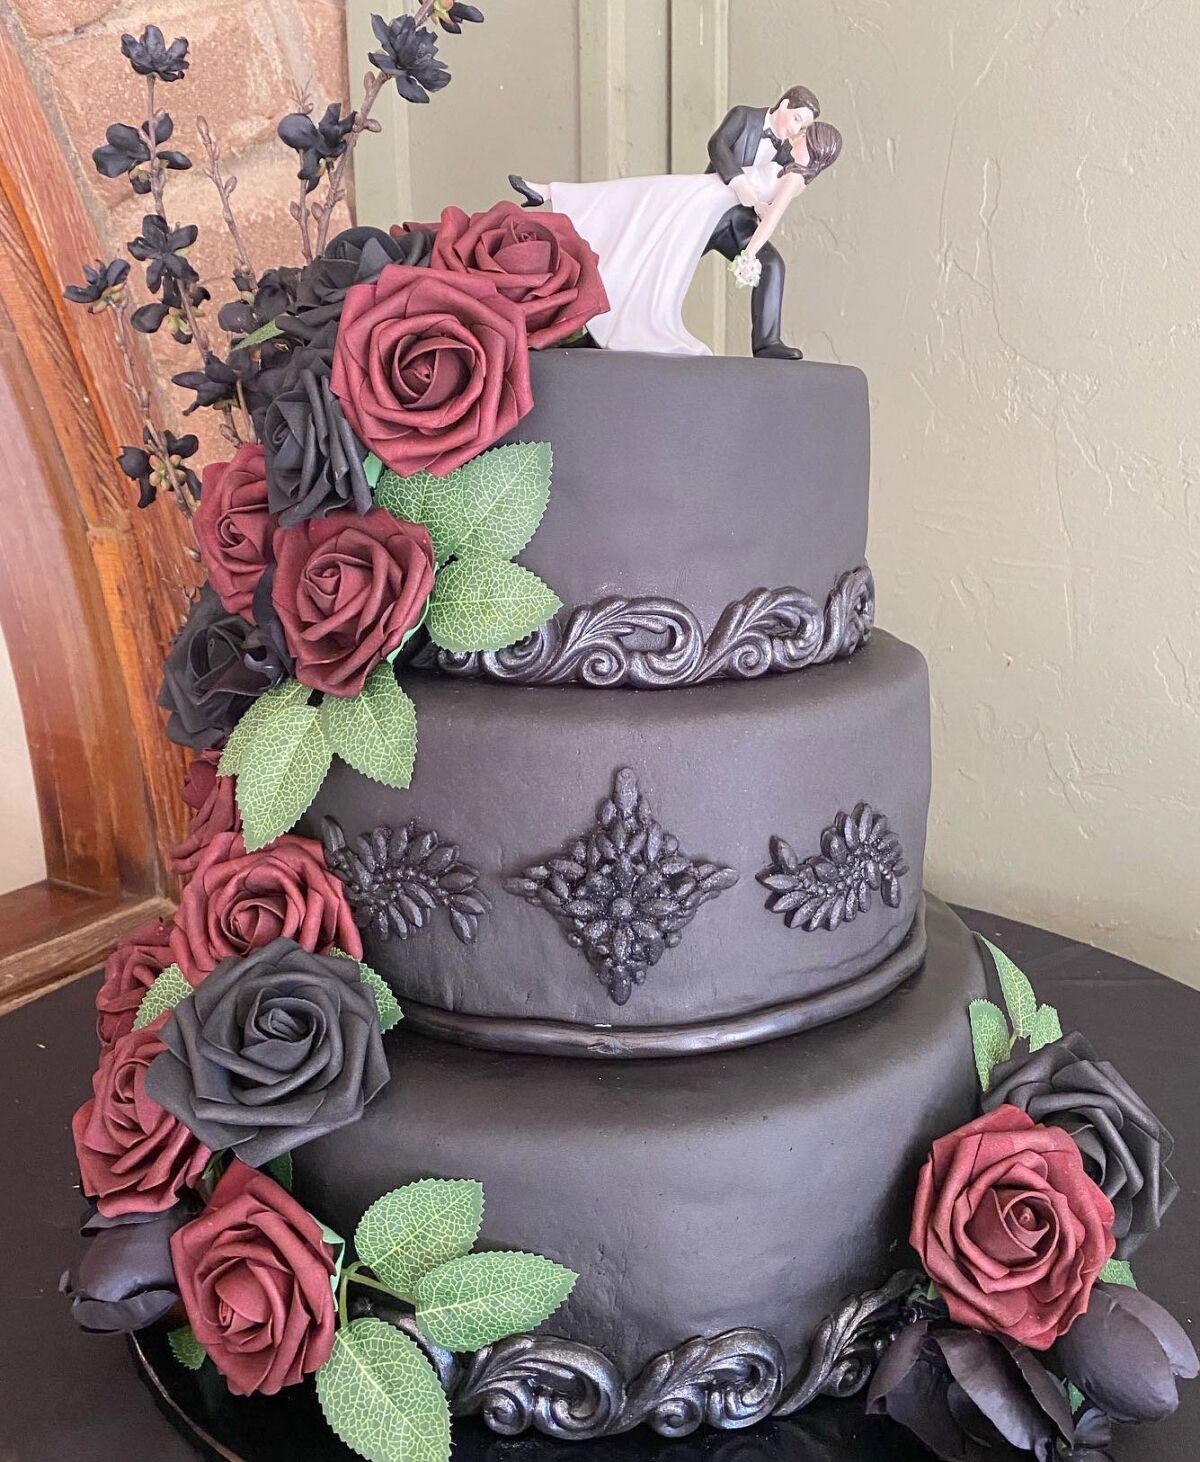 This cake was made to reflect a Wears Victorian/Sleepy Hollow meets Southern style fall festival wedding theme.